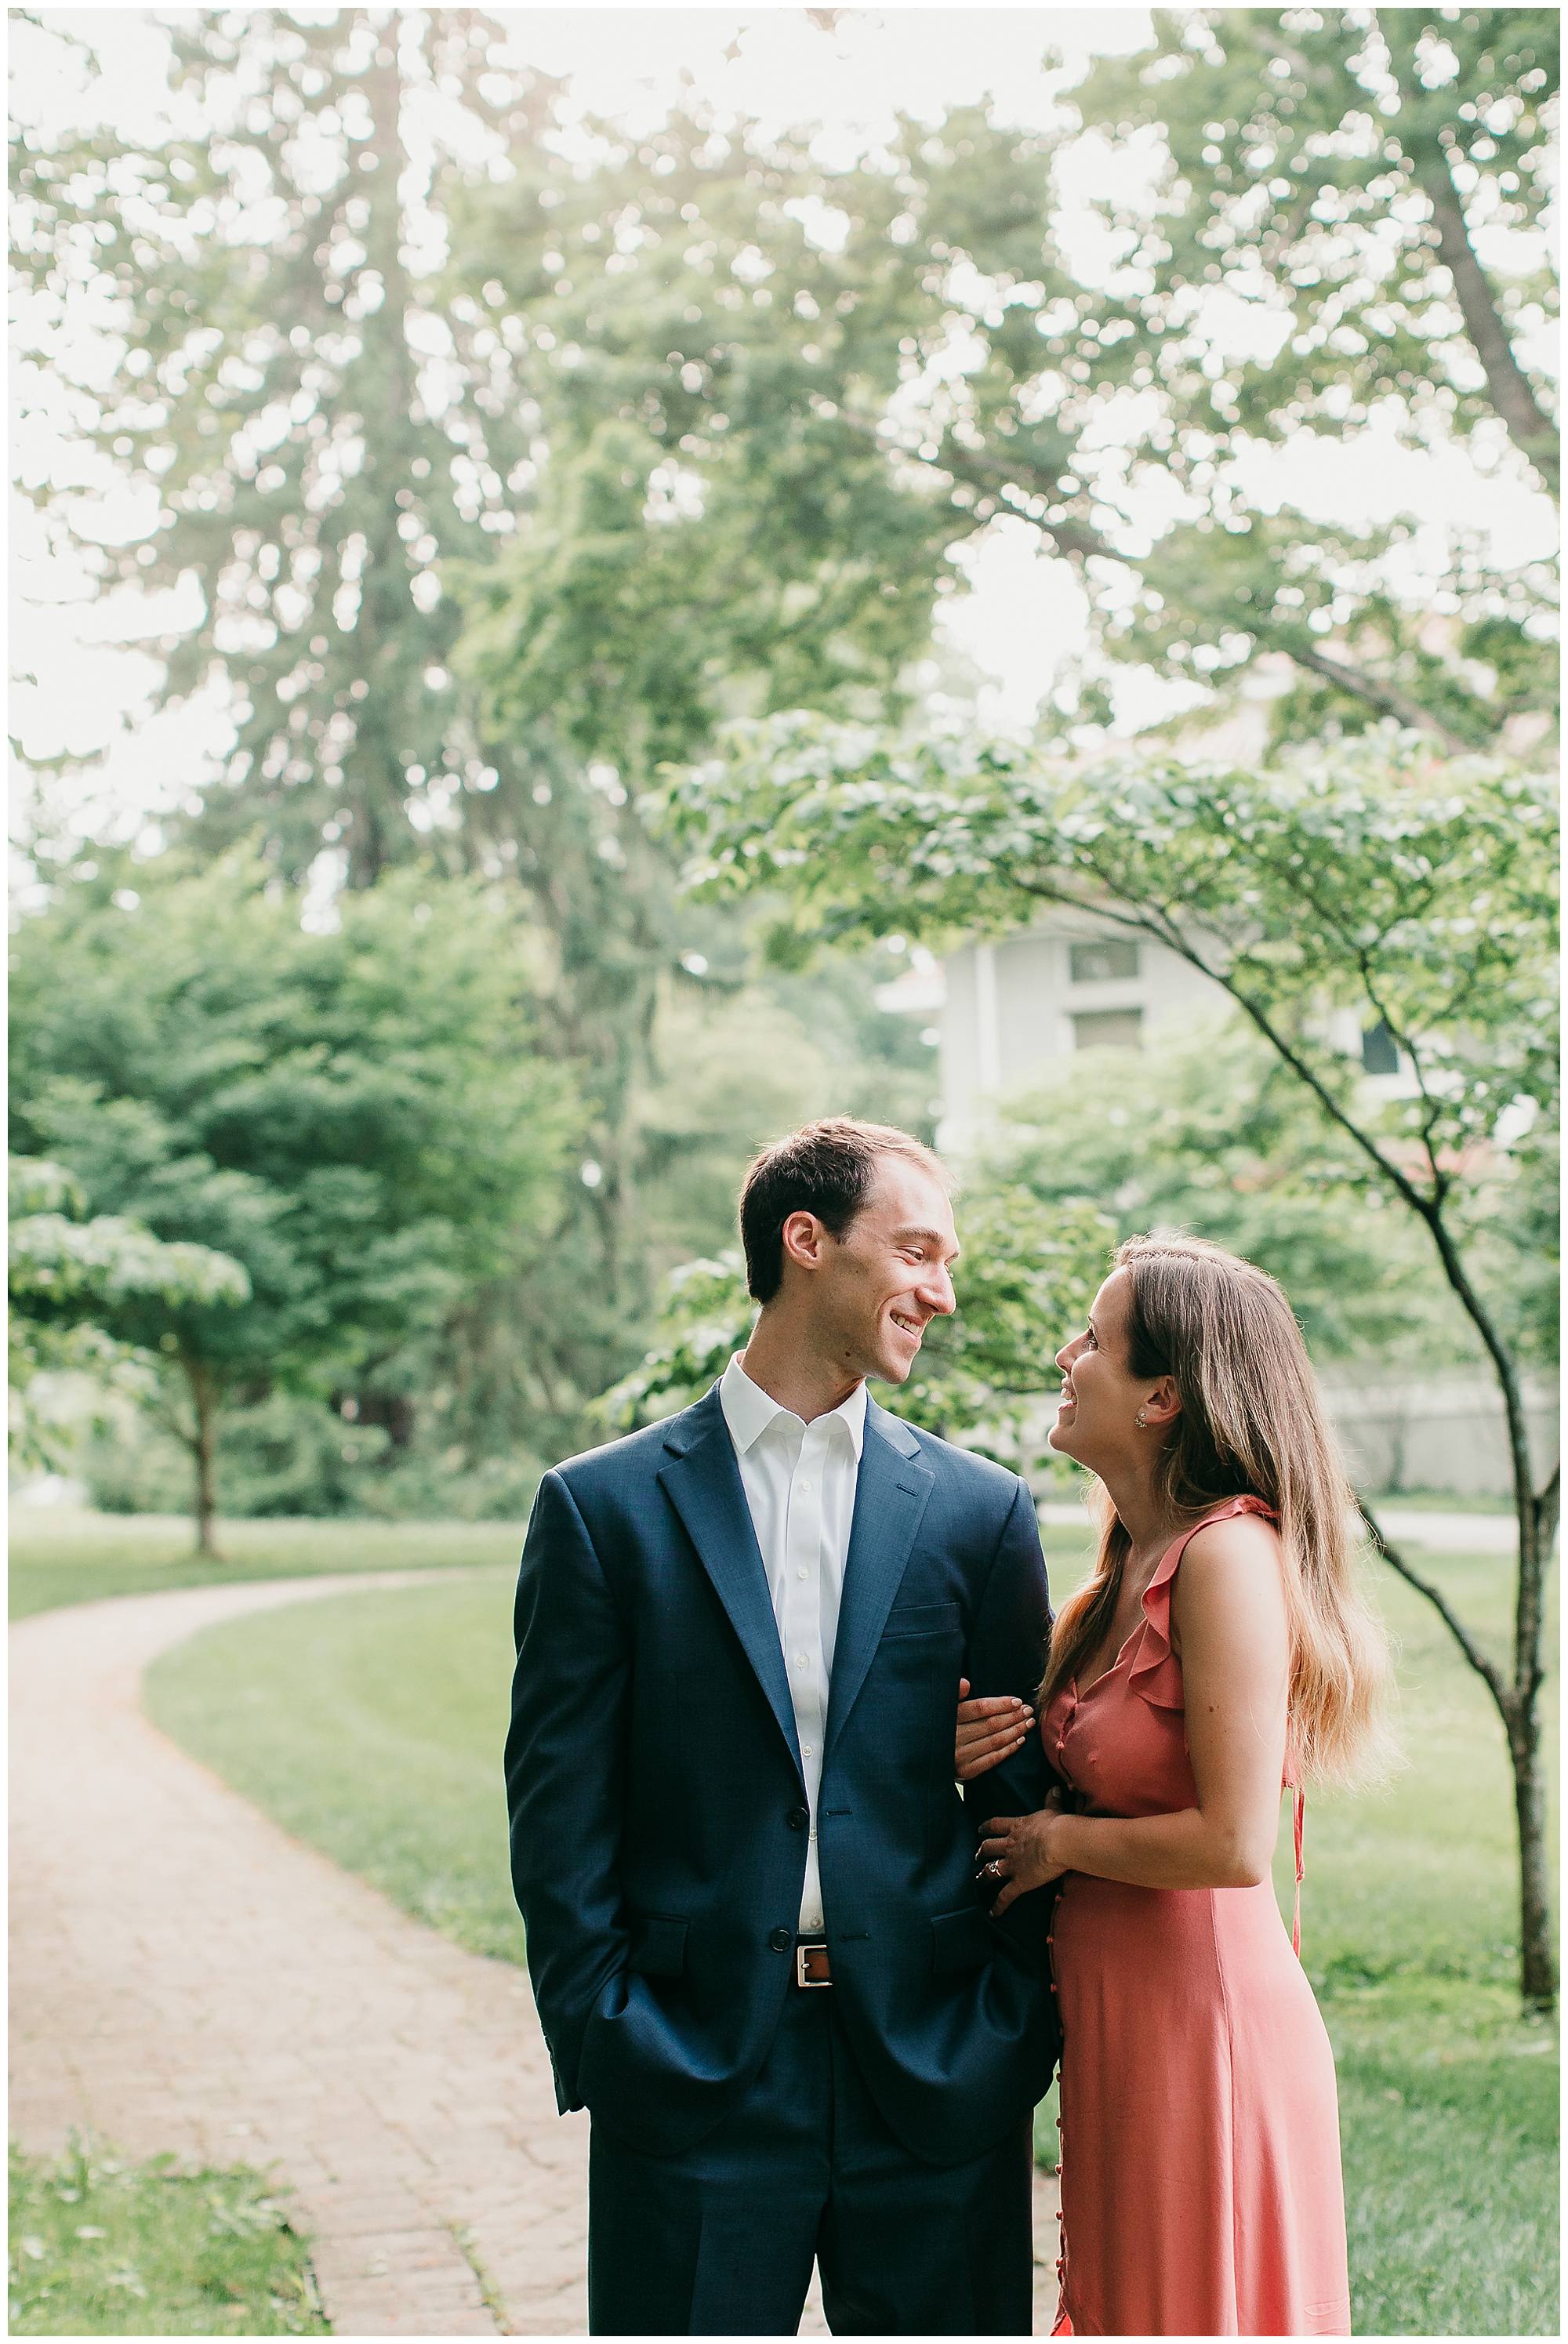 Anchorage Park Engagement Session, Louisville KY, Louisville Wedding Photographer, Engaged, Engagement Session, 